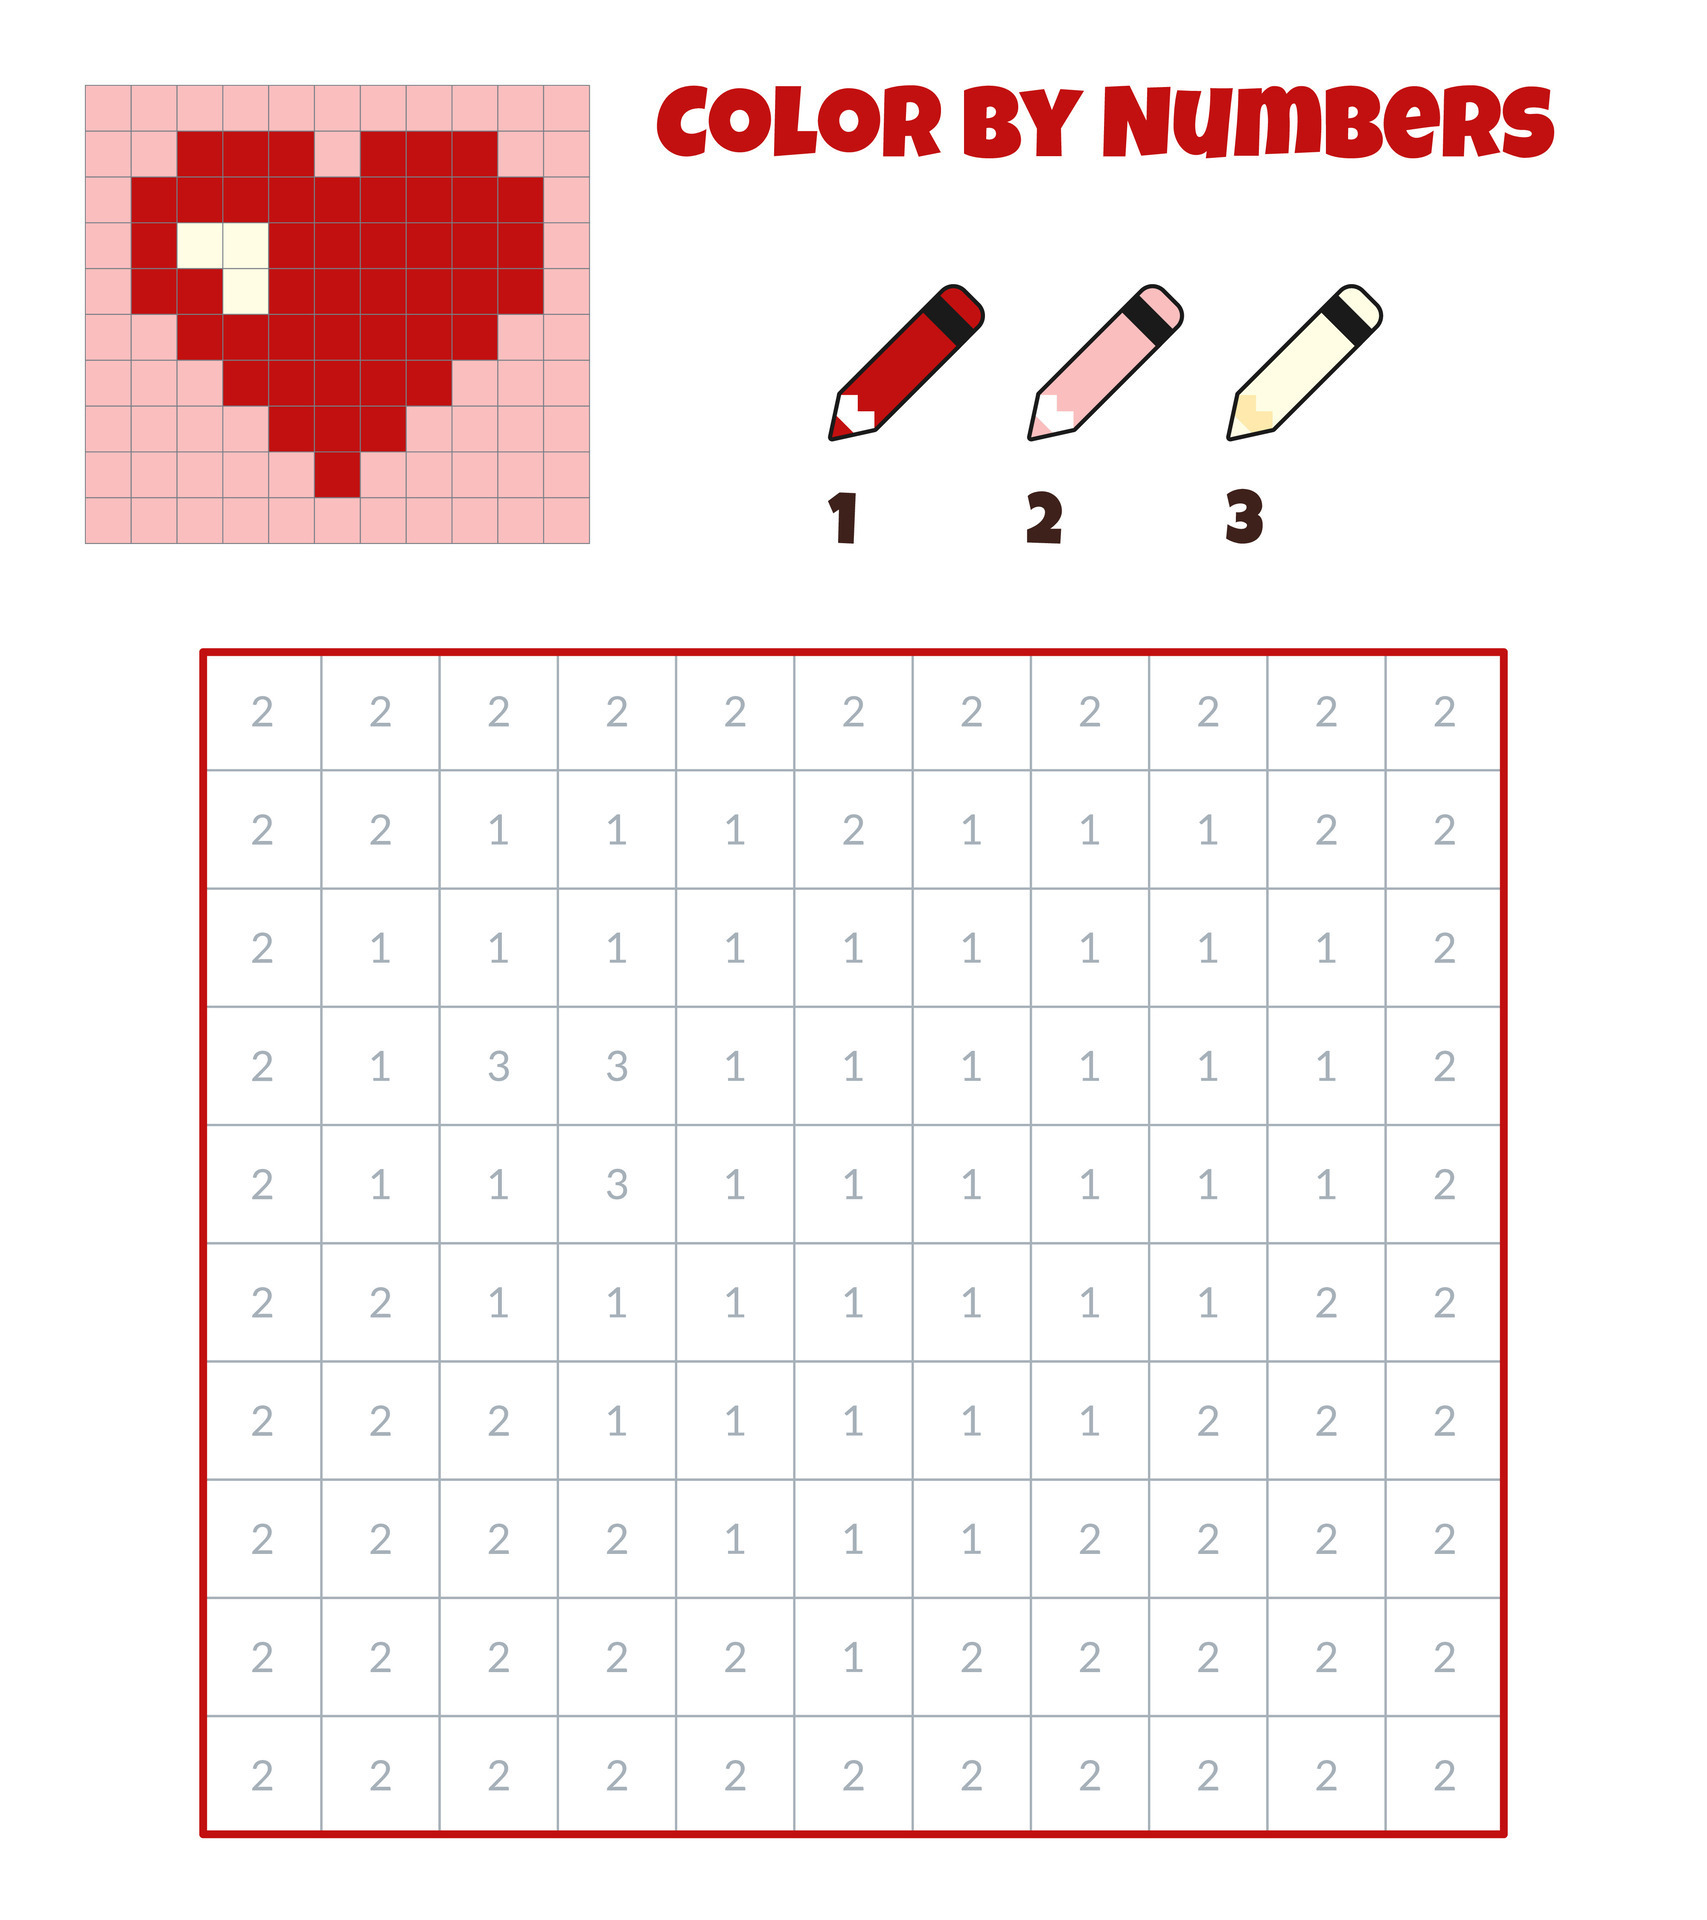 https://static.vecteezy.com/system/resources/previews/026/107/924/original/color-by-numbers-education-game-for-children-red-heart-coloring-book-with-numbered-squares-pixel-art-graphic-task-for-kids-free-vector.jpg